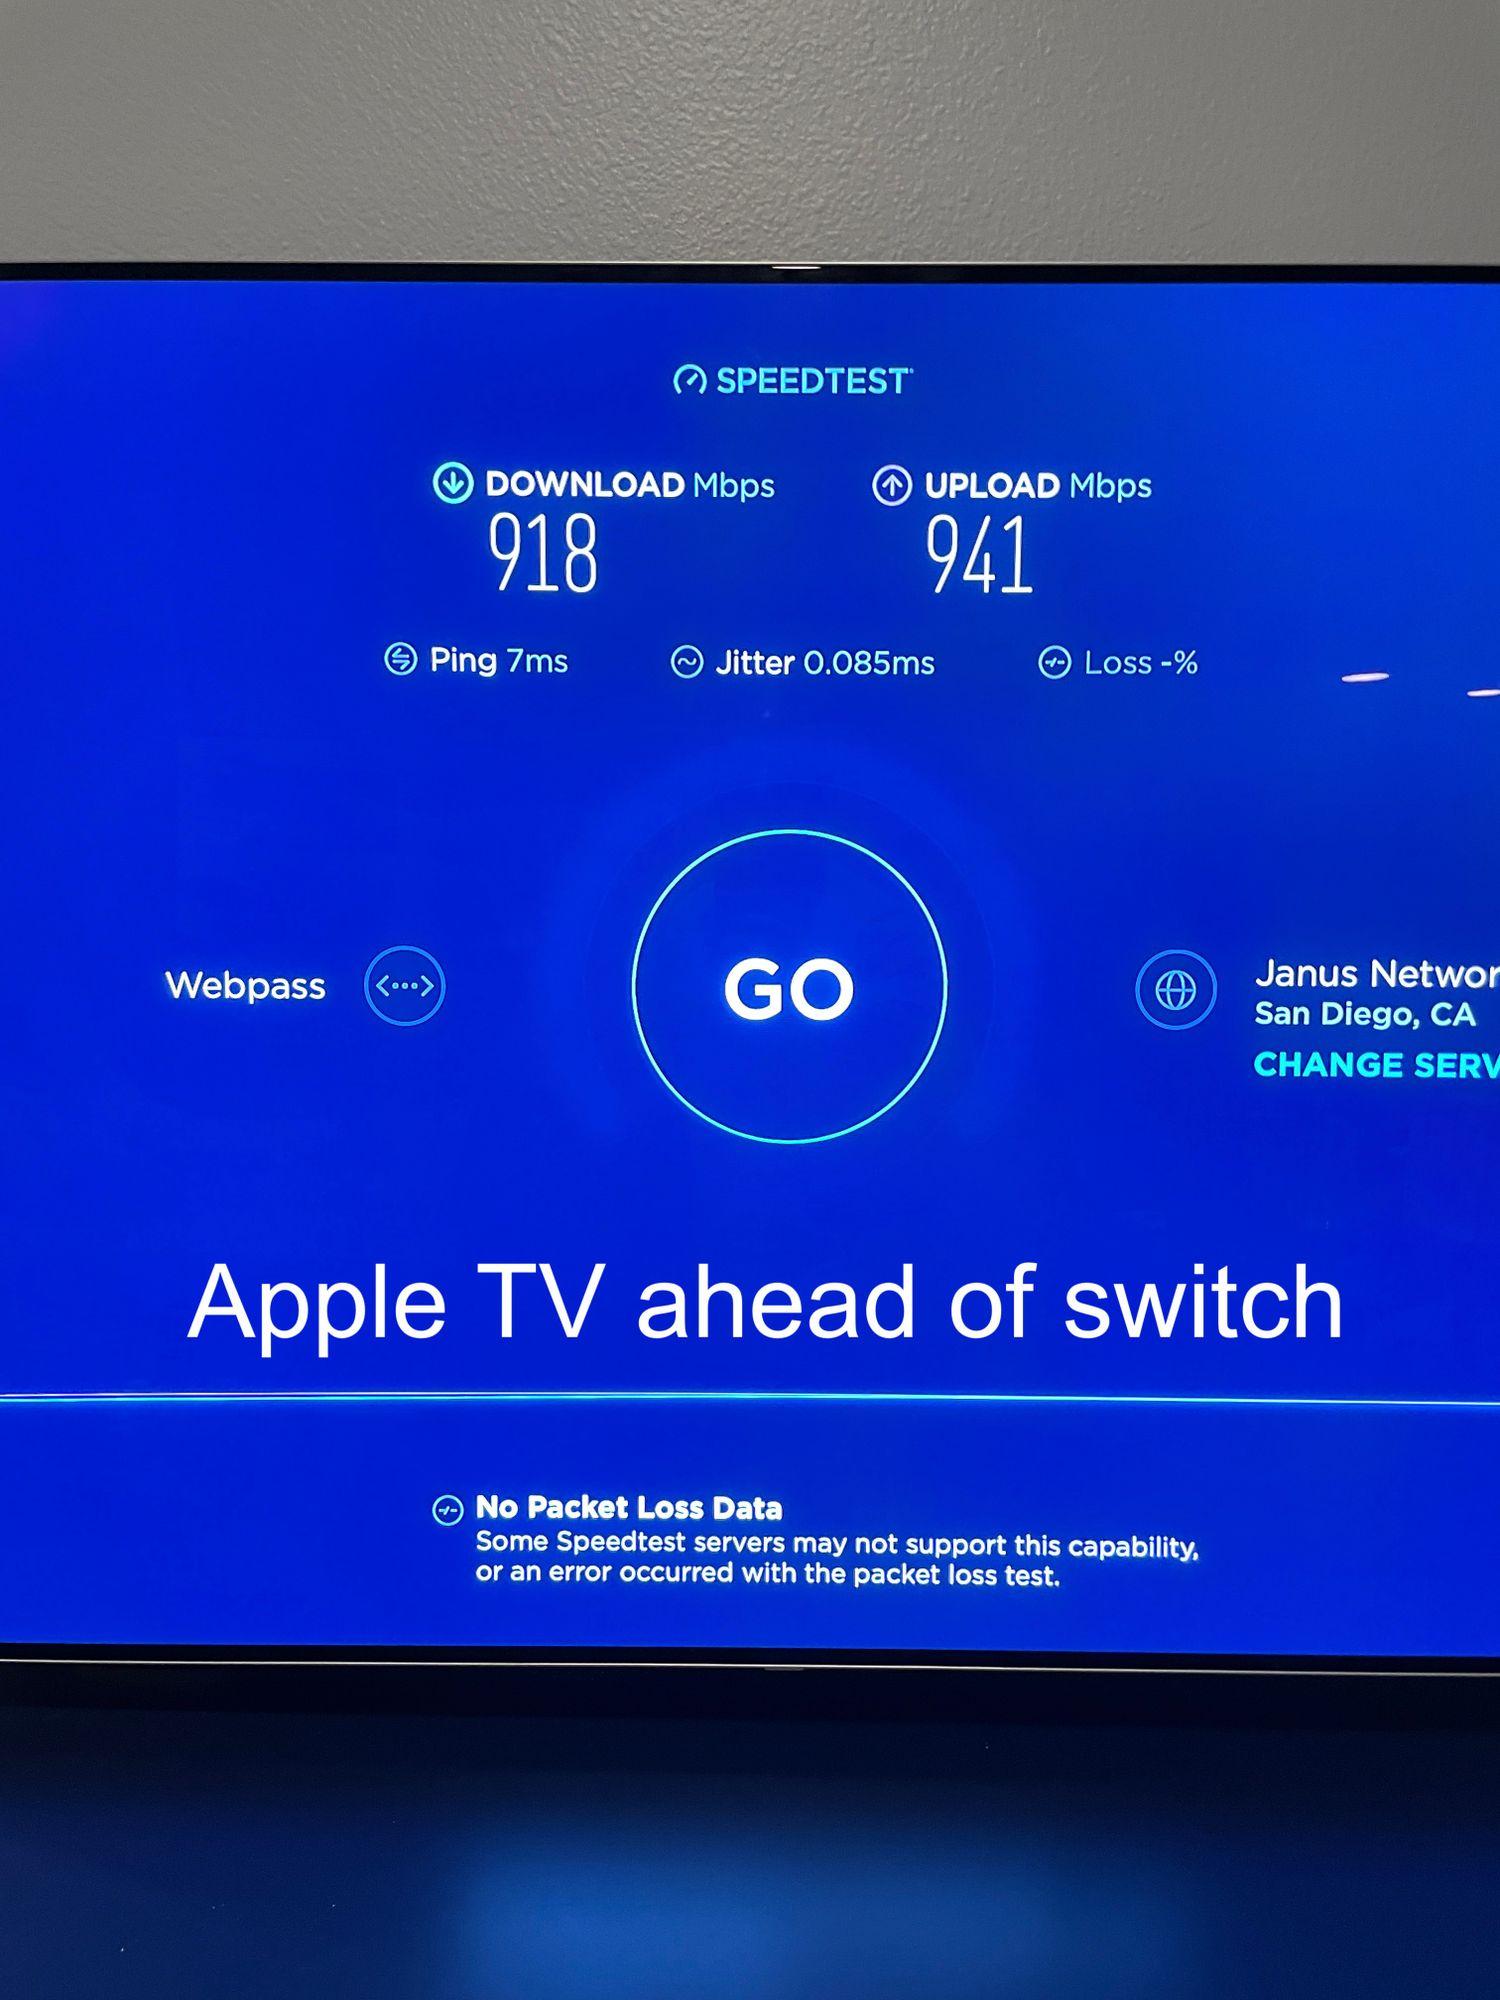 Unifi Gear Causing 30% Wired Speed for Apple TV (vs Direct ISP Connection) | Ubiquiti Community